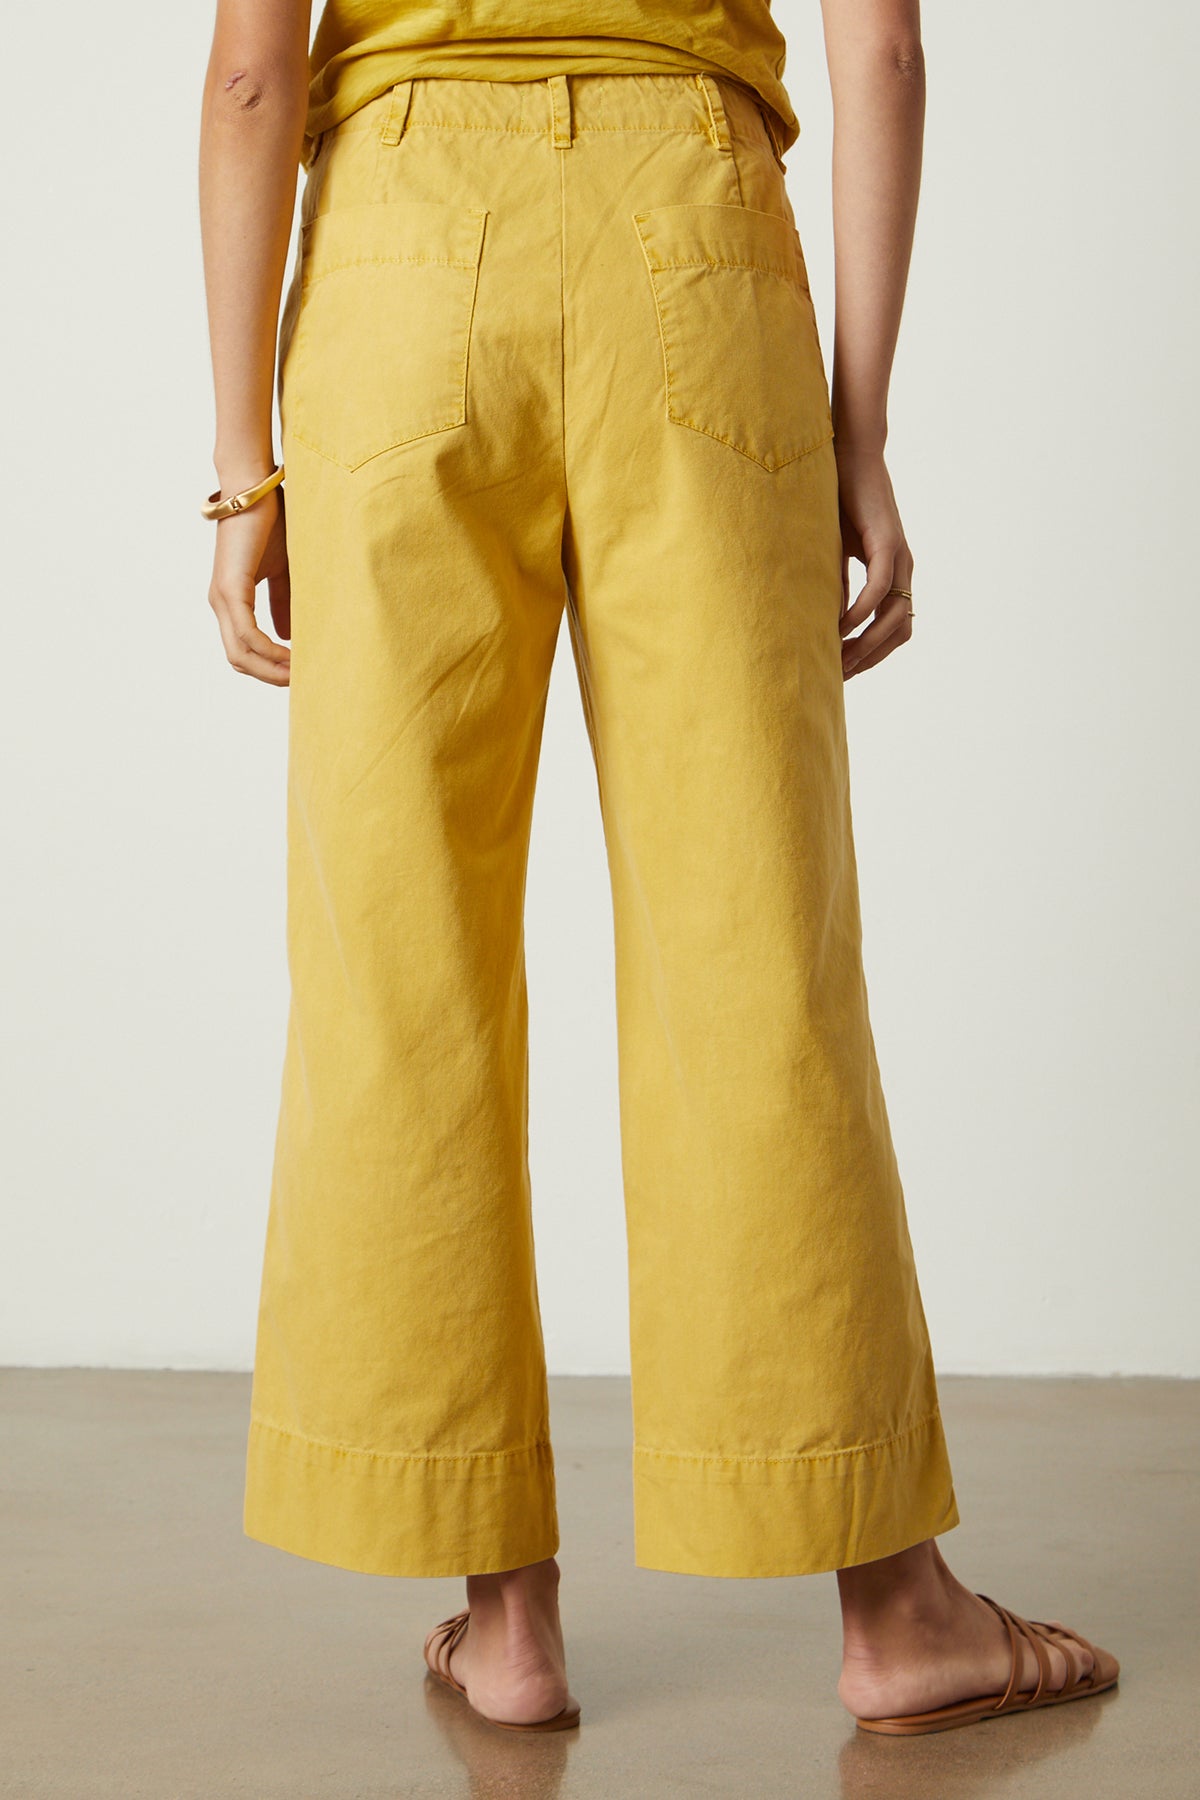 Mya Pant in golden yellow aurora color back-26022773489857